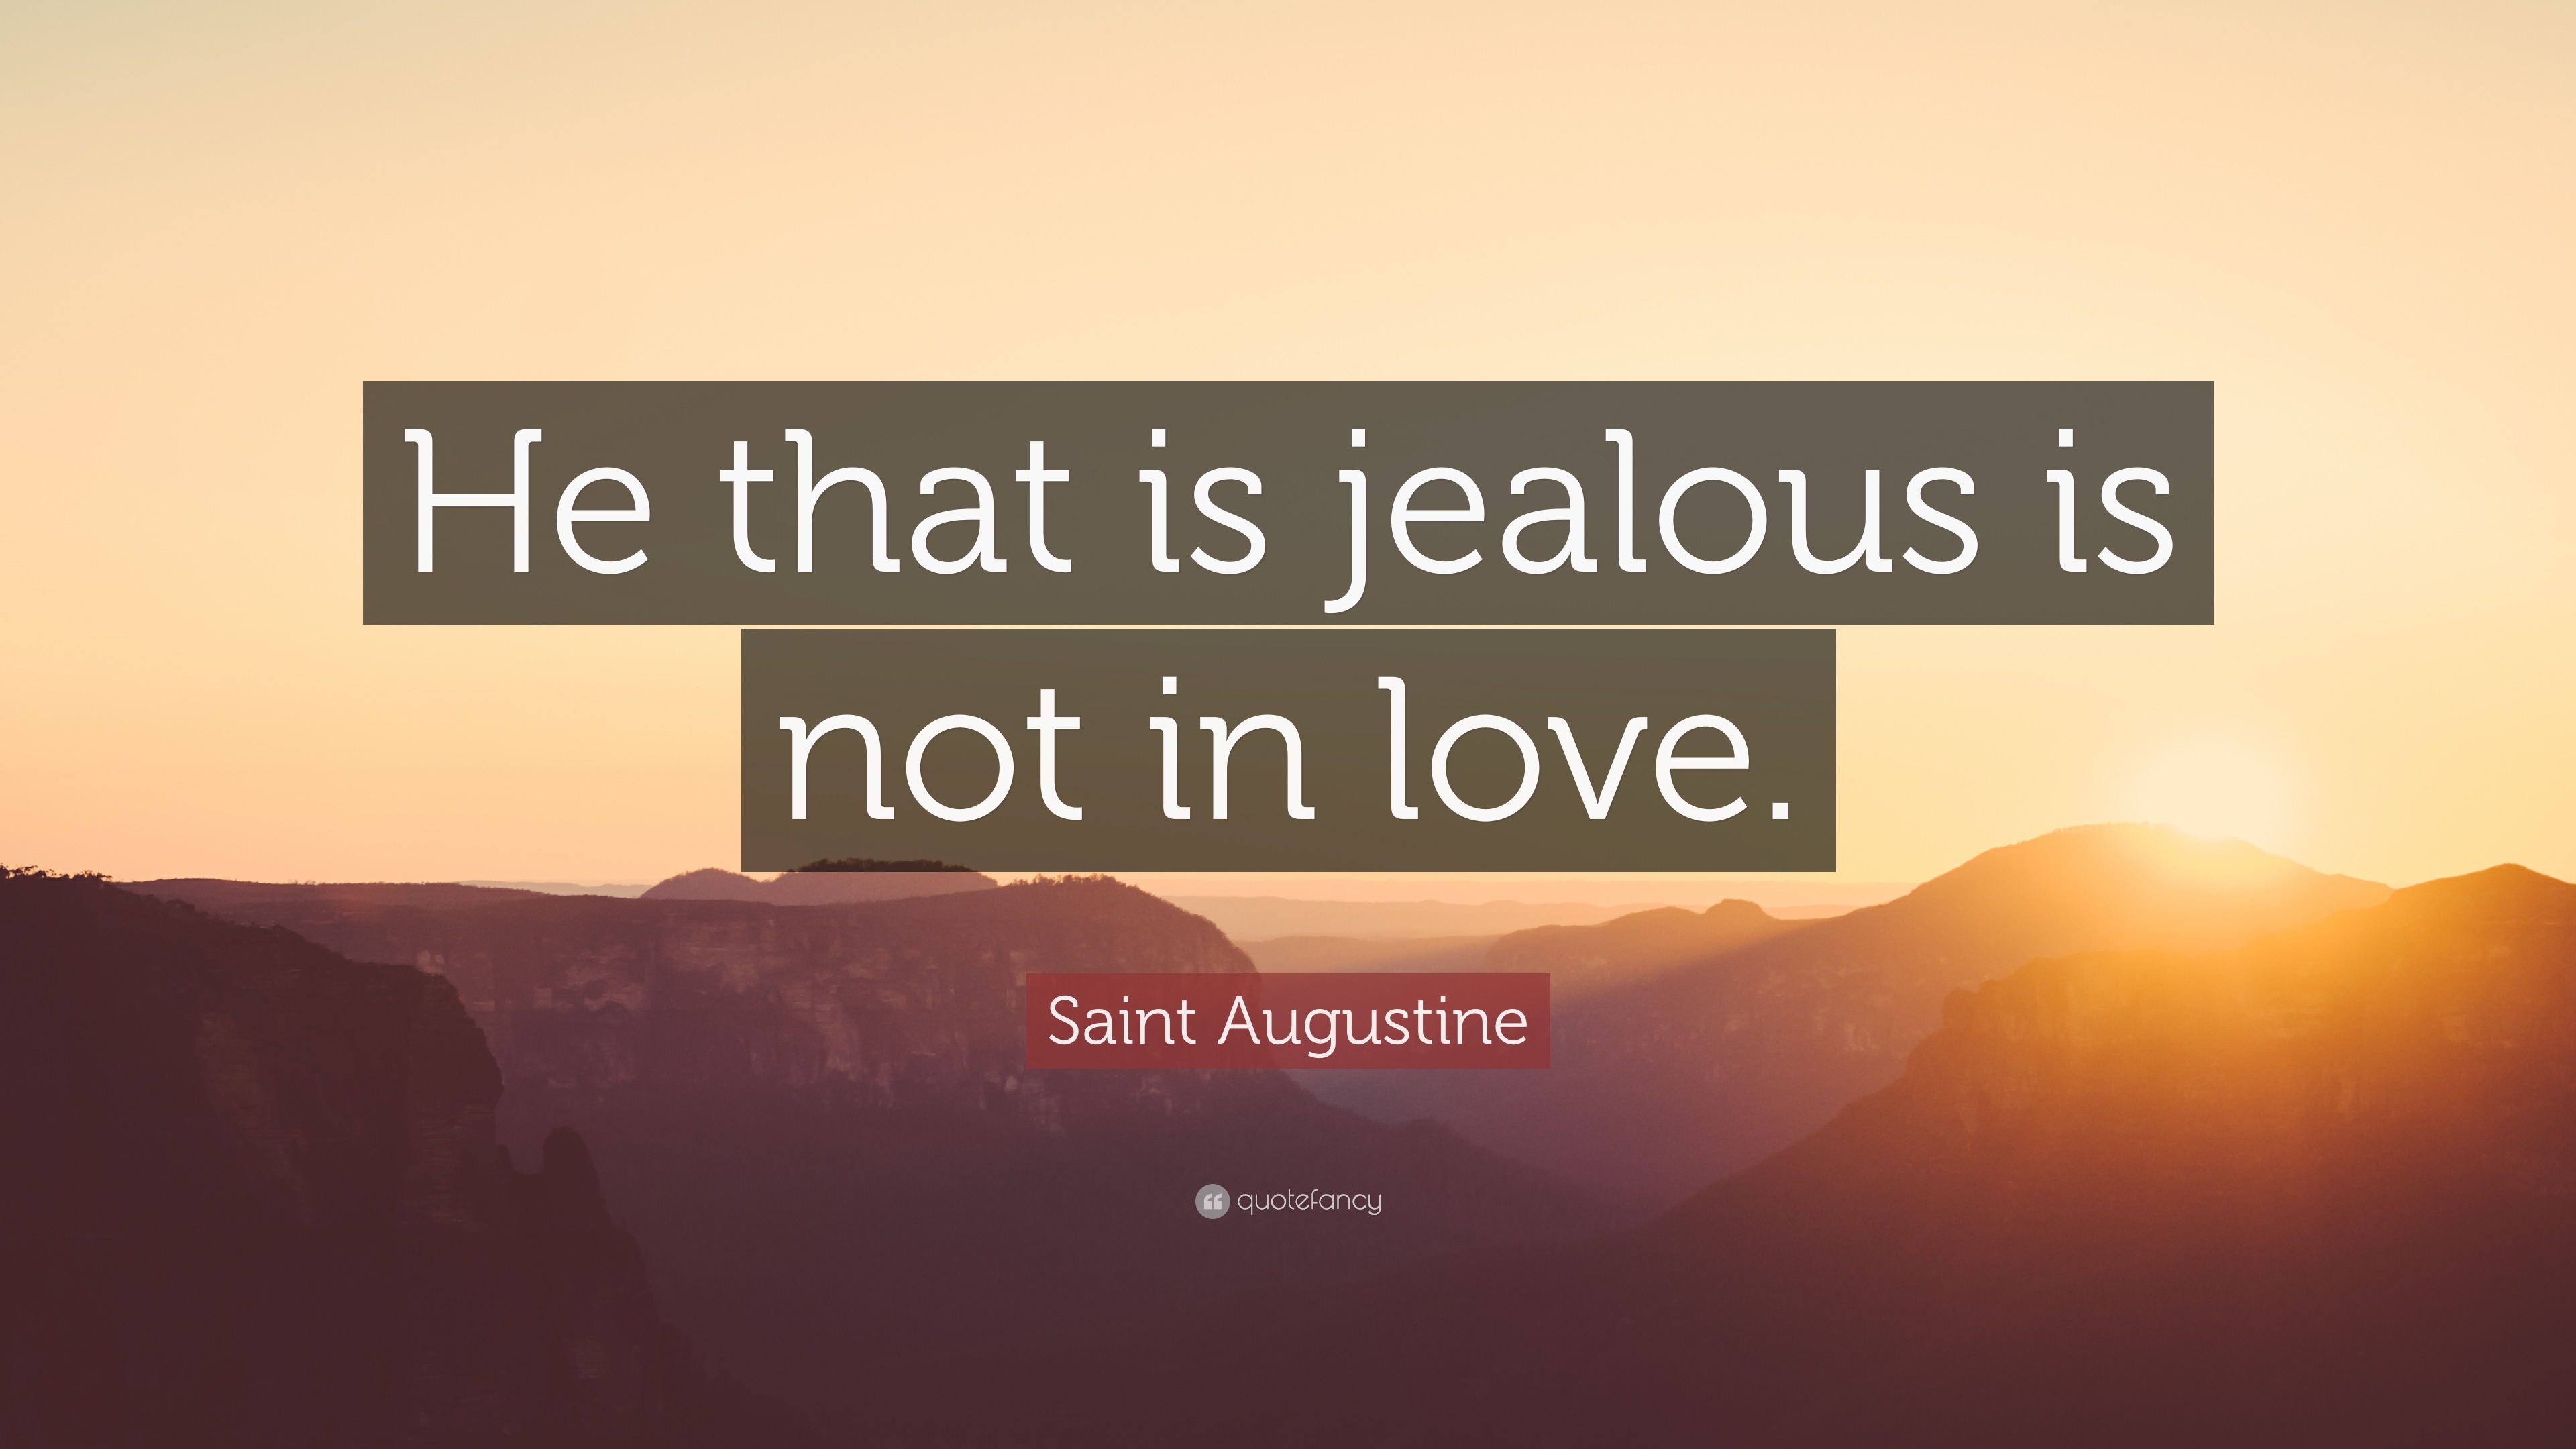 Saint Augustine Quote “He that is jealous is not in love ”